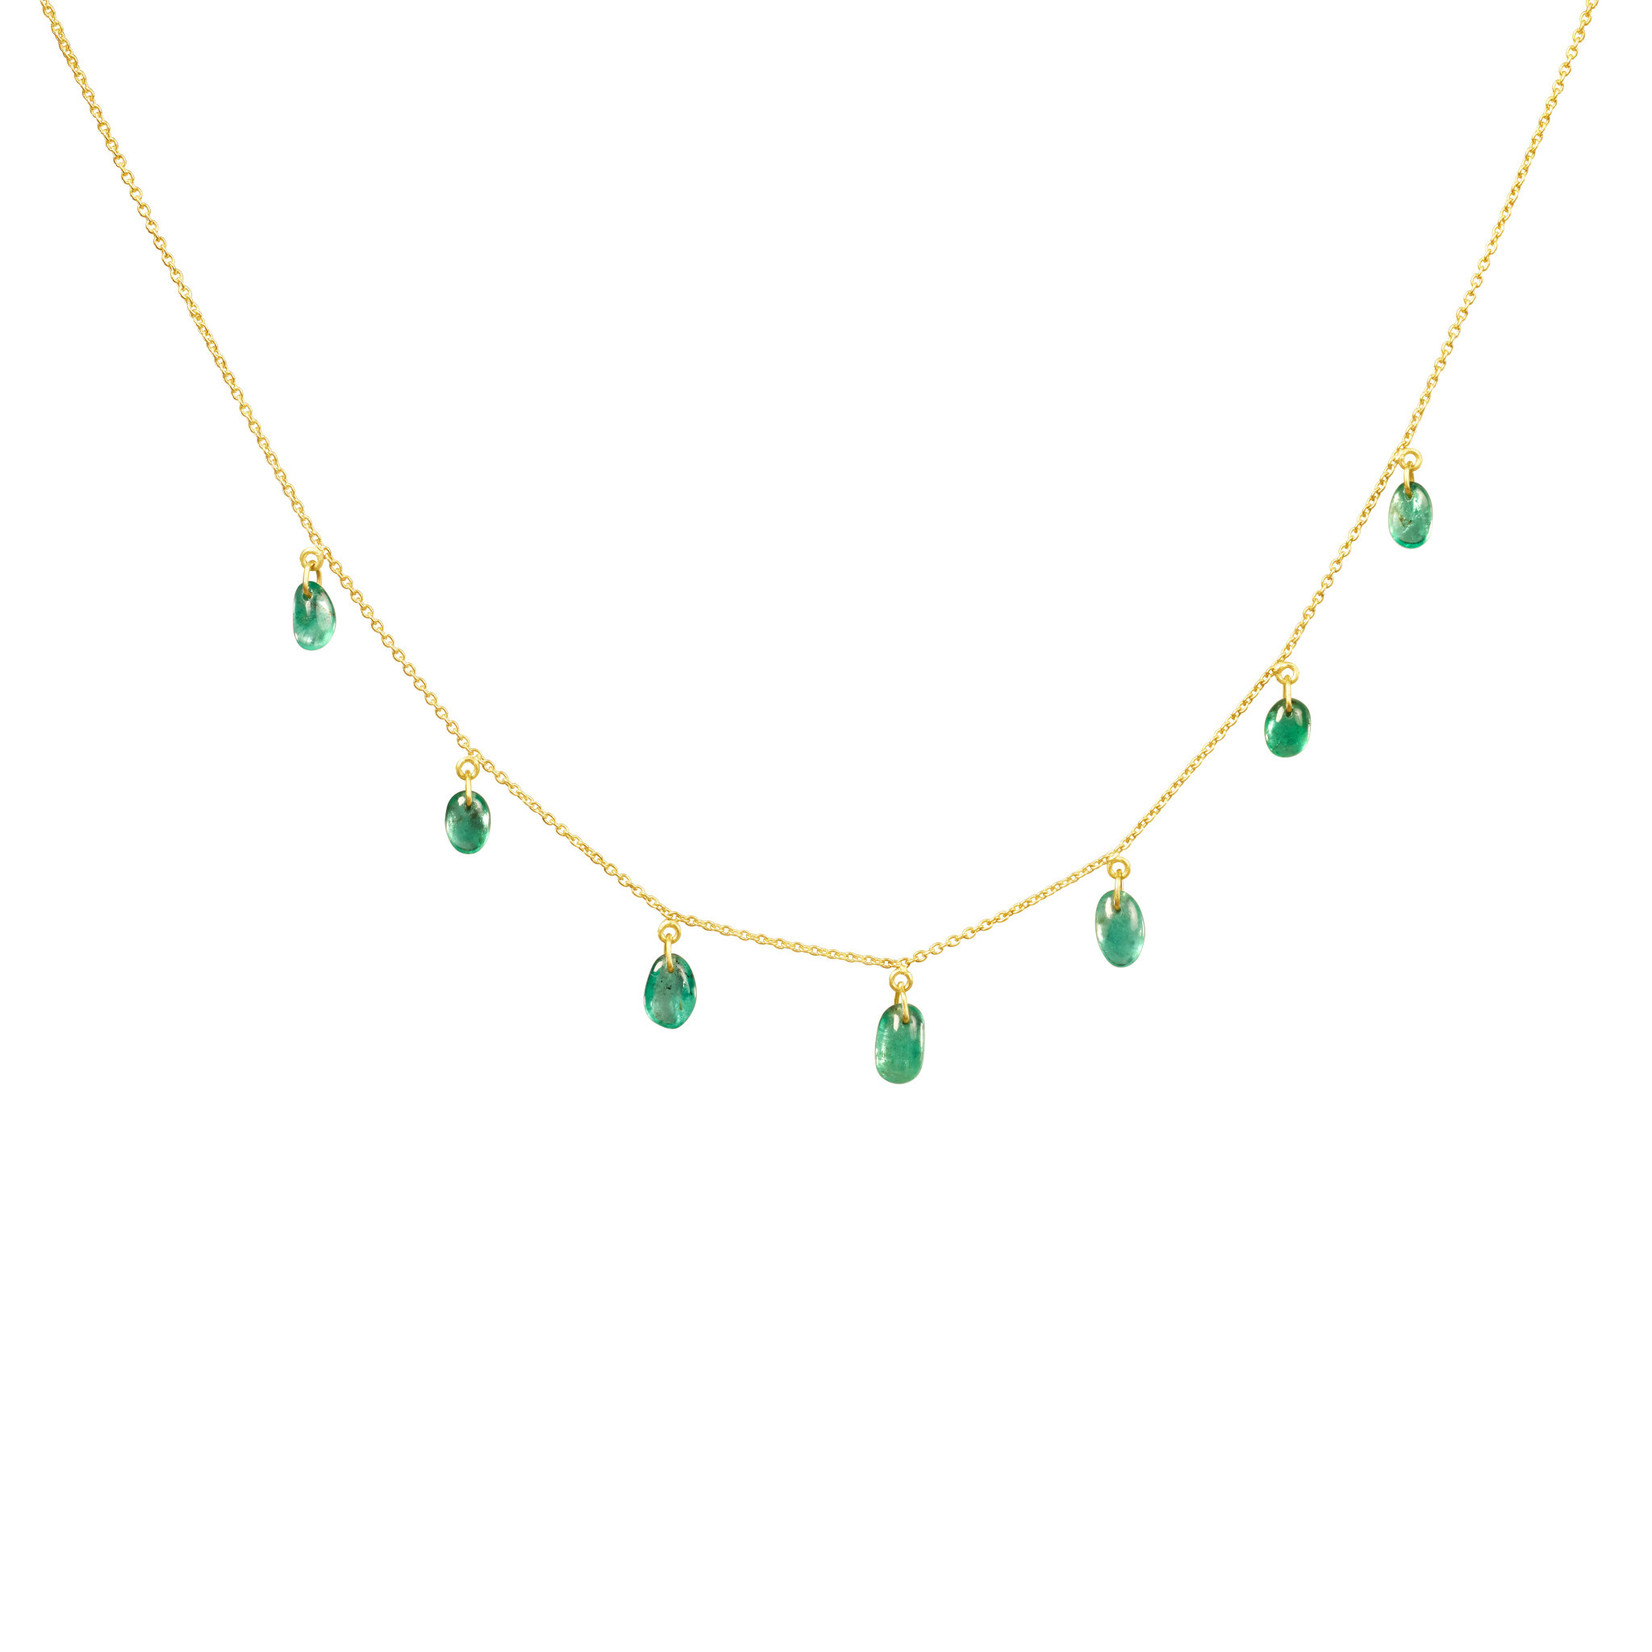 Sophie Theakston Emerald Tumble Garland Necklace